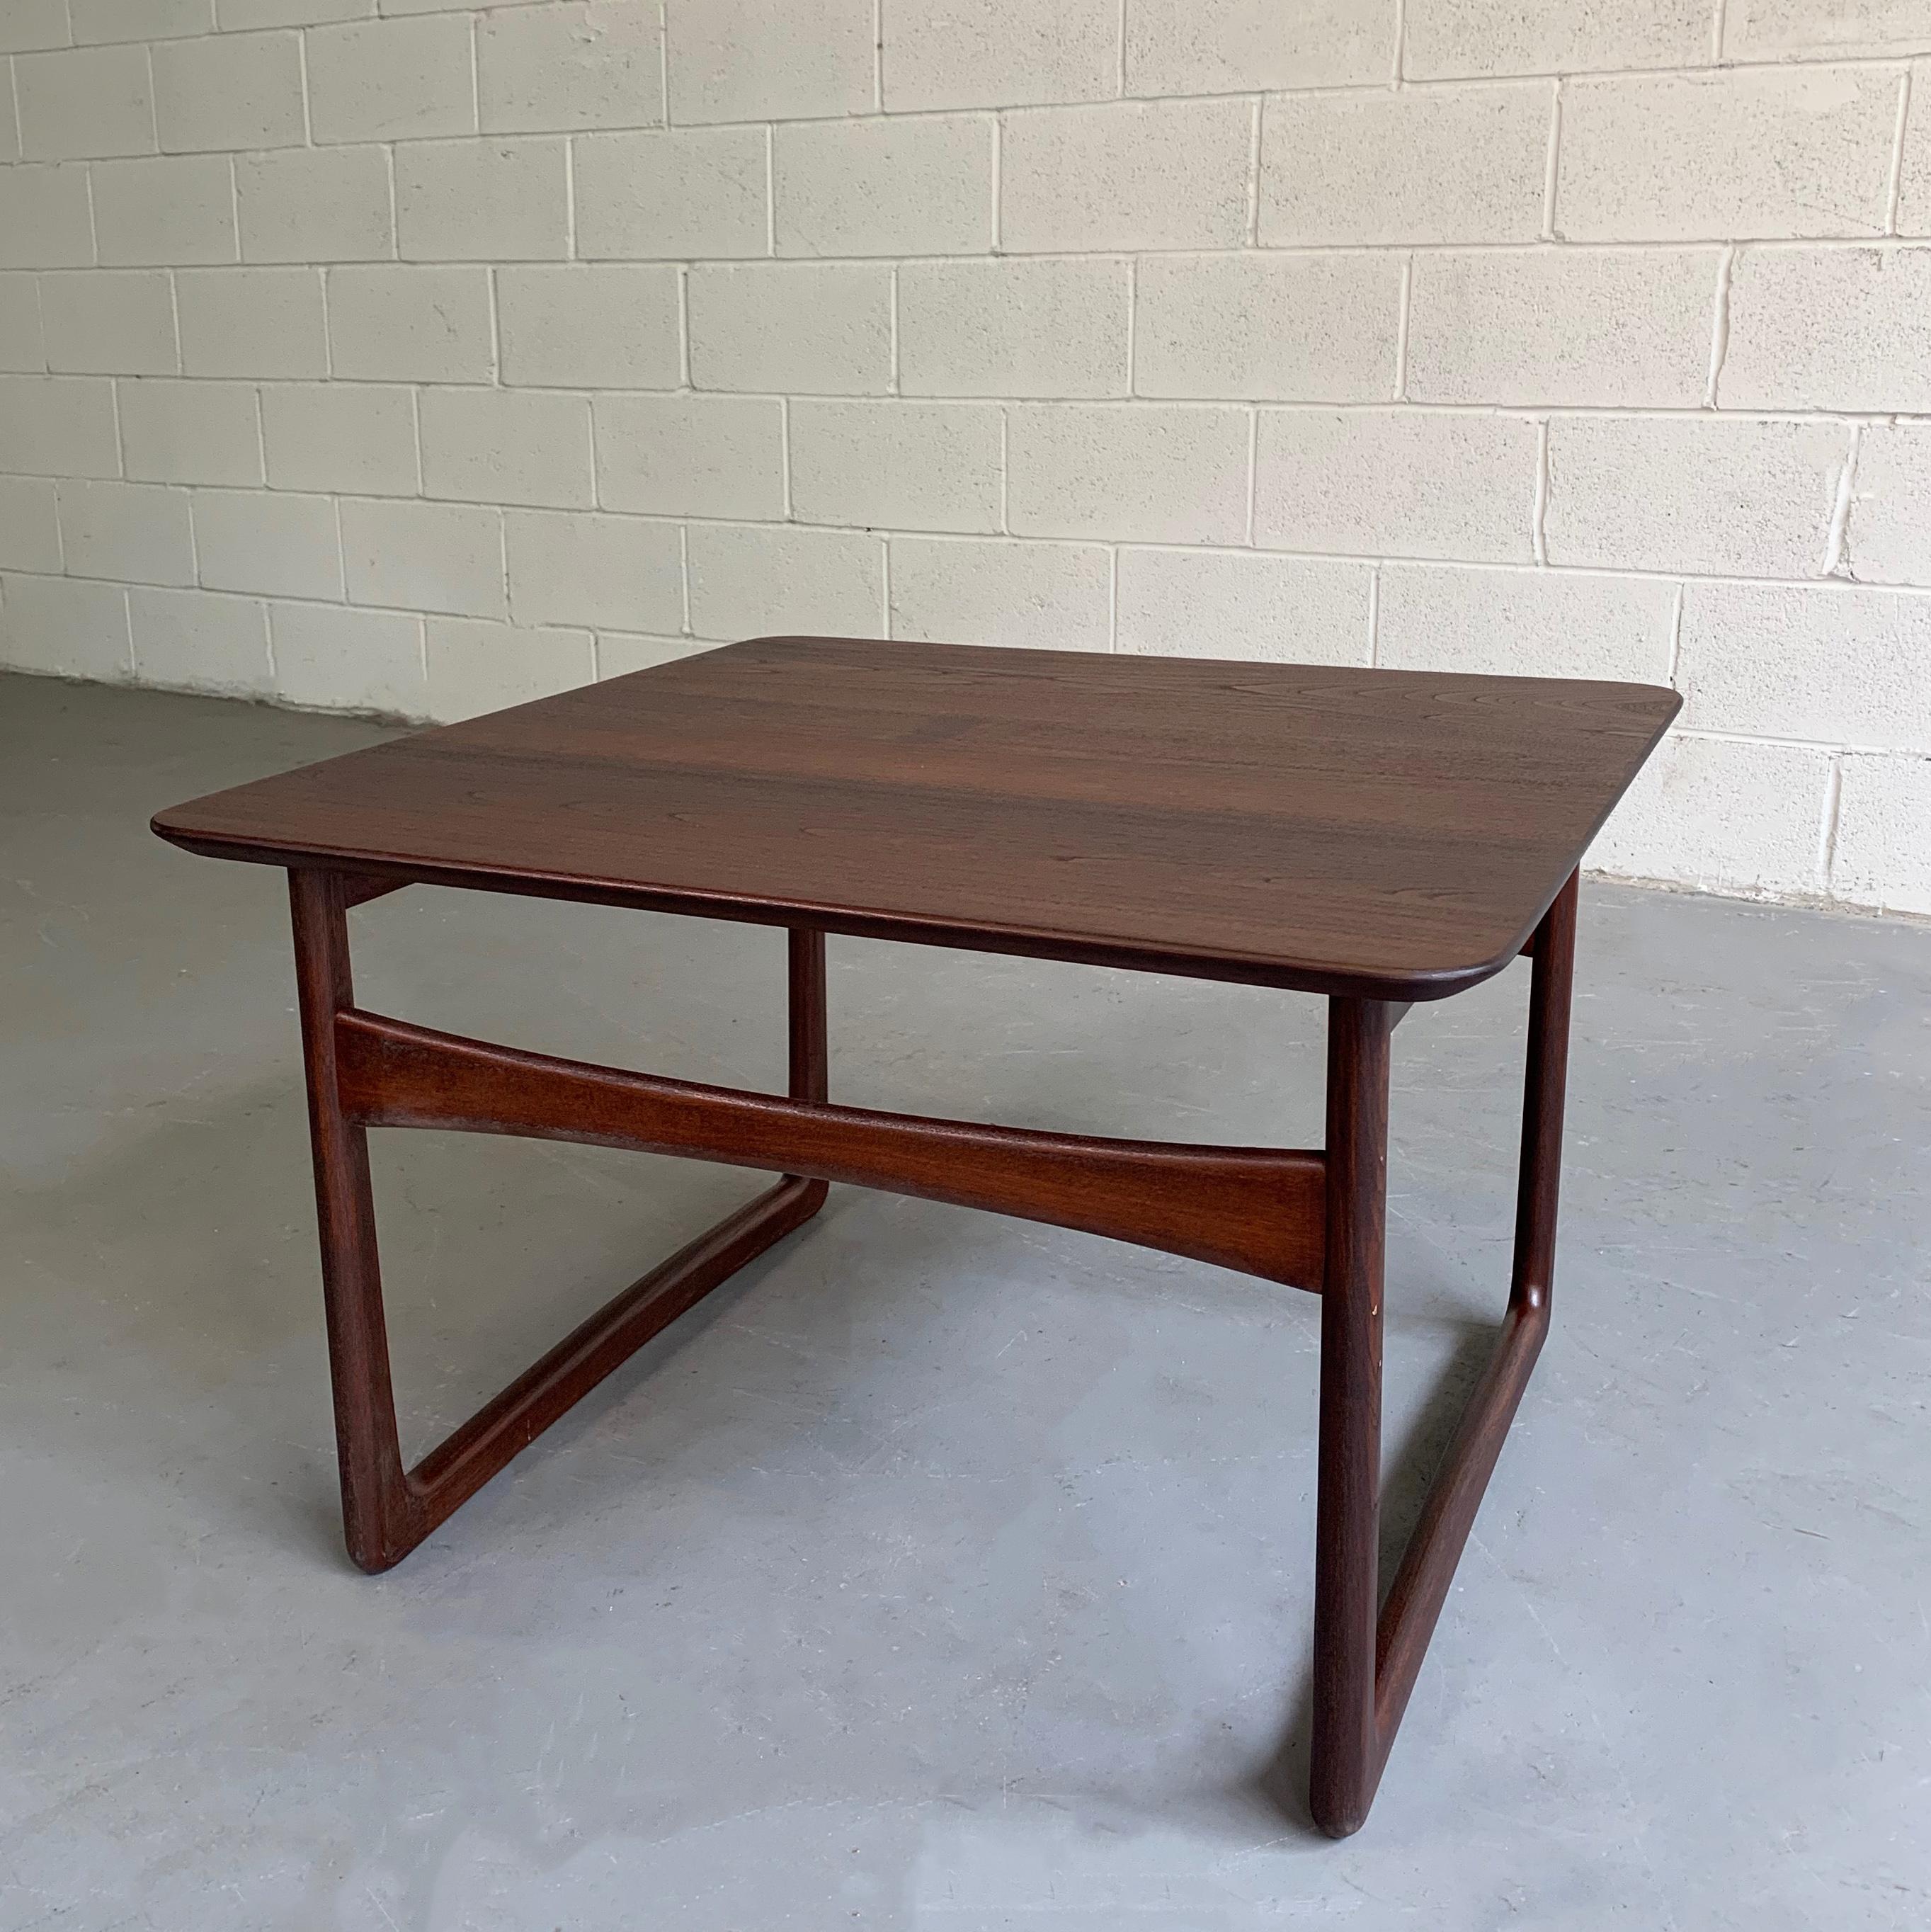 Elegant, Mid-Century Modern, dark teak, side table by Peter Hvidt & Orla Mølgaard-Nielsen sold by John Stuart features sleigh legs that are interesting from all angles. Two tables are available, the other in a medium teak finish is listed separately.